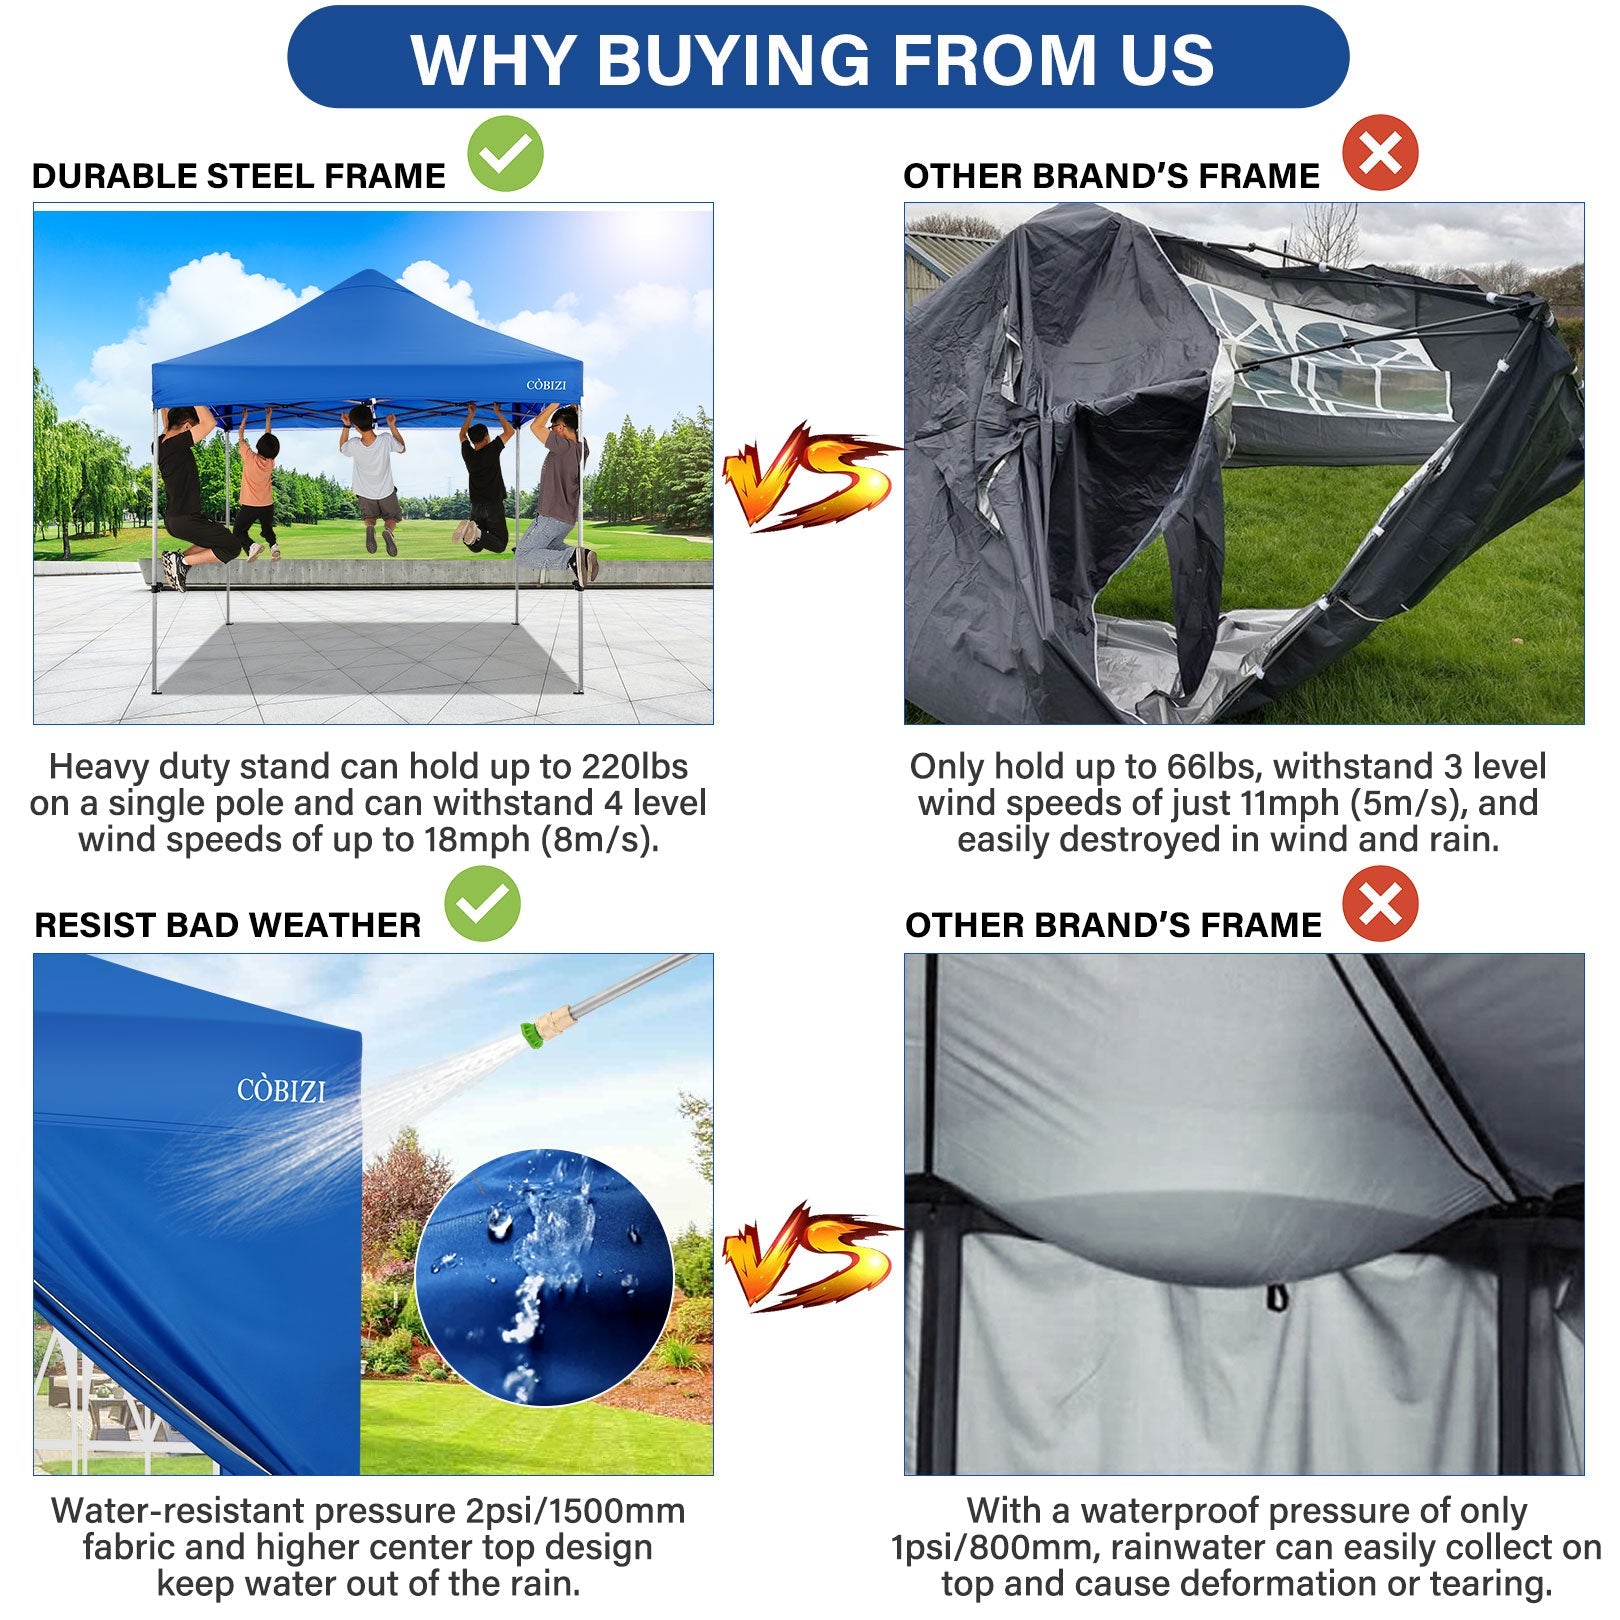 10 x 10ft Pop Up Canopy Tent Instant Outdoor Party Heavy Duty Canopy Straight Leg Commercial Gazebo Tent Shelter with 4 Removable Sidewalls, 4 Sand Bags, Roller Bag, Blue